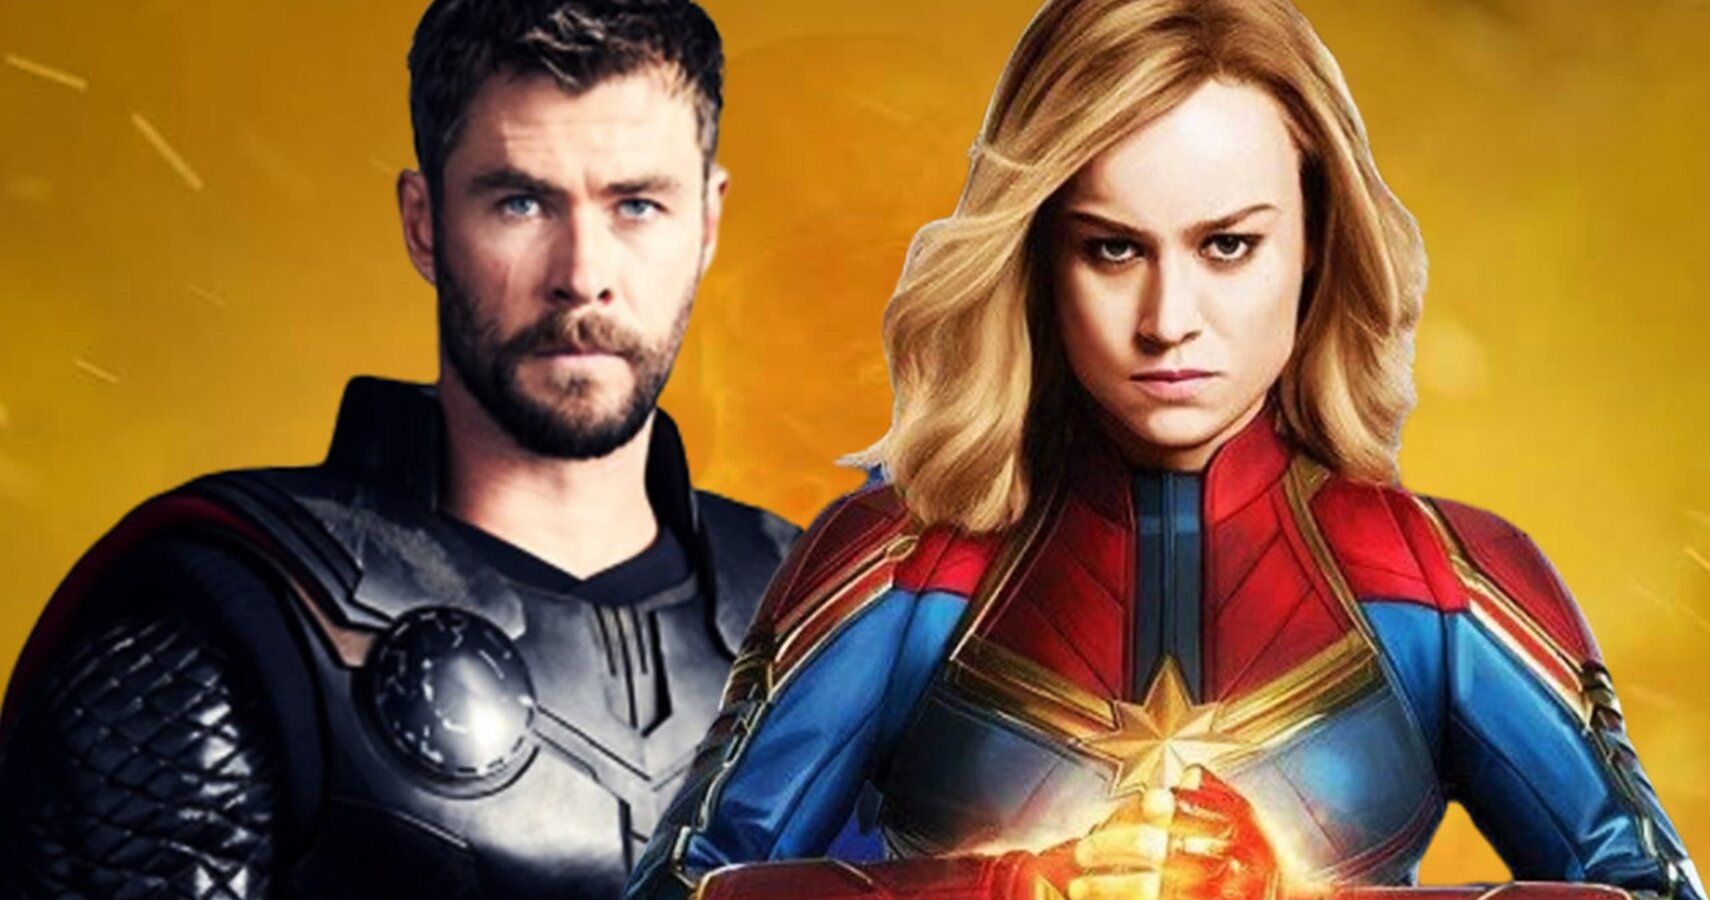 A blended image of Thor and Captain Marvel from the MCU